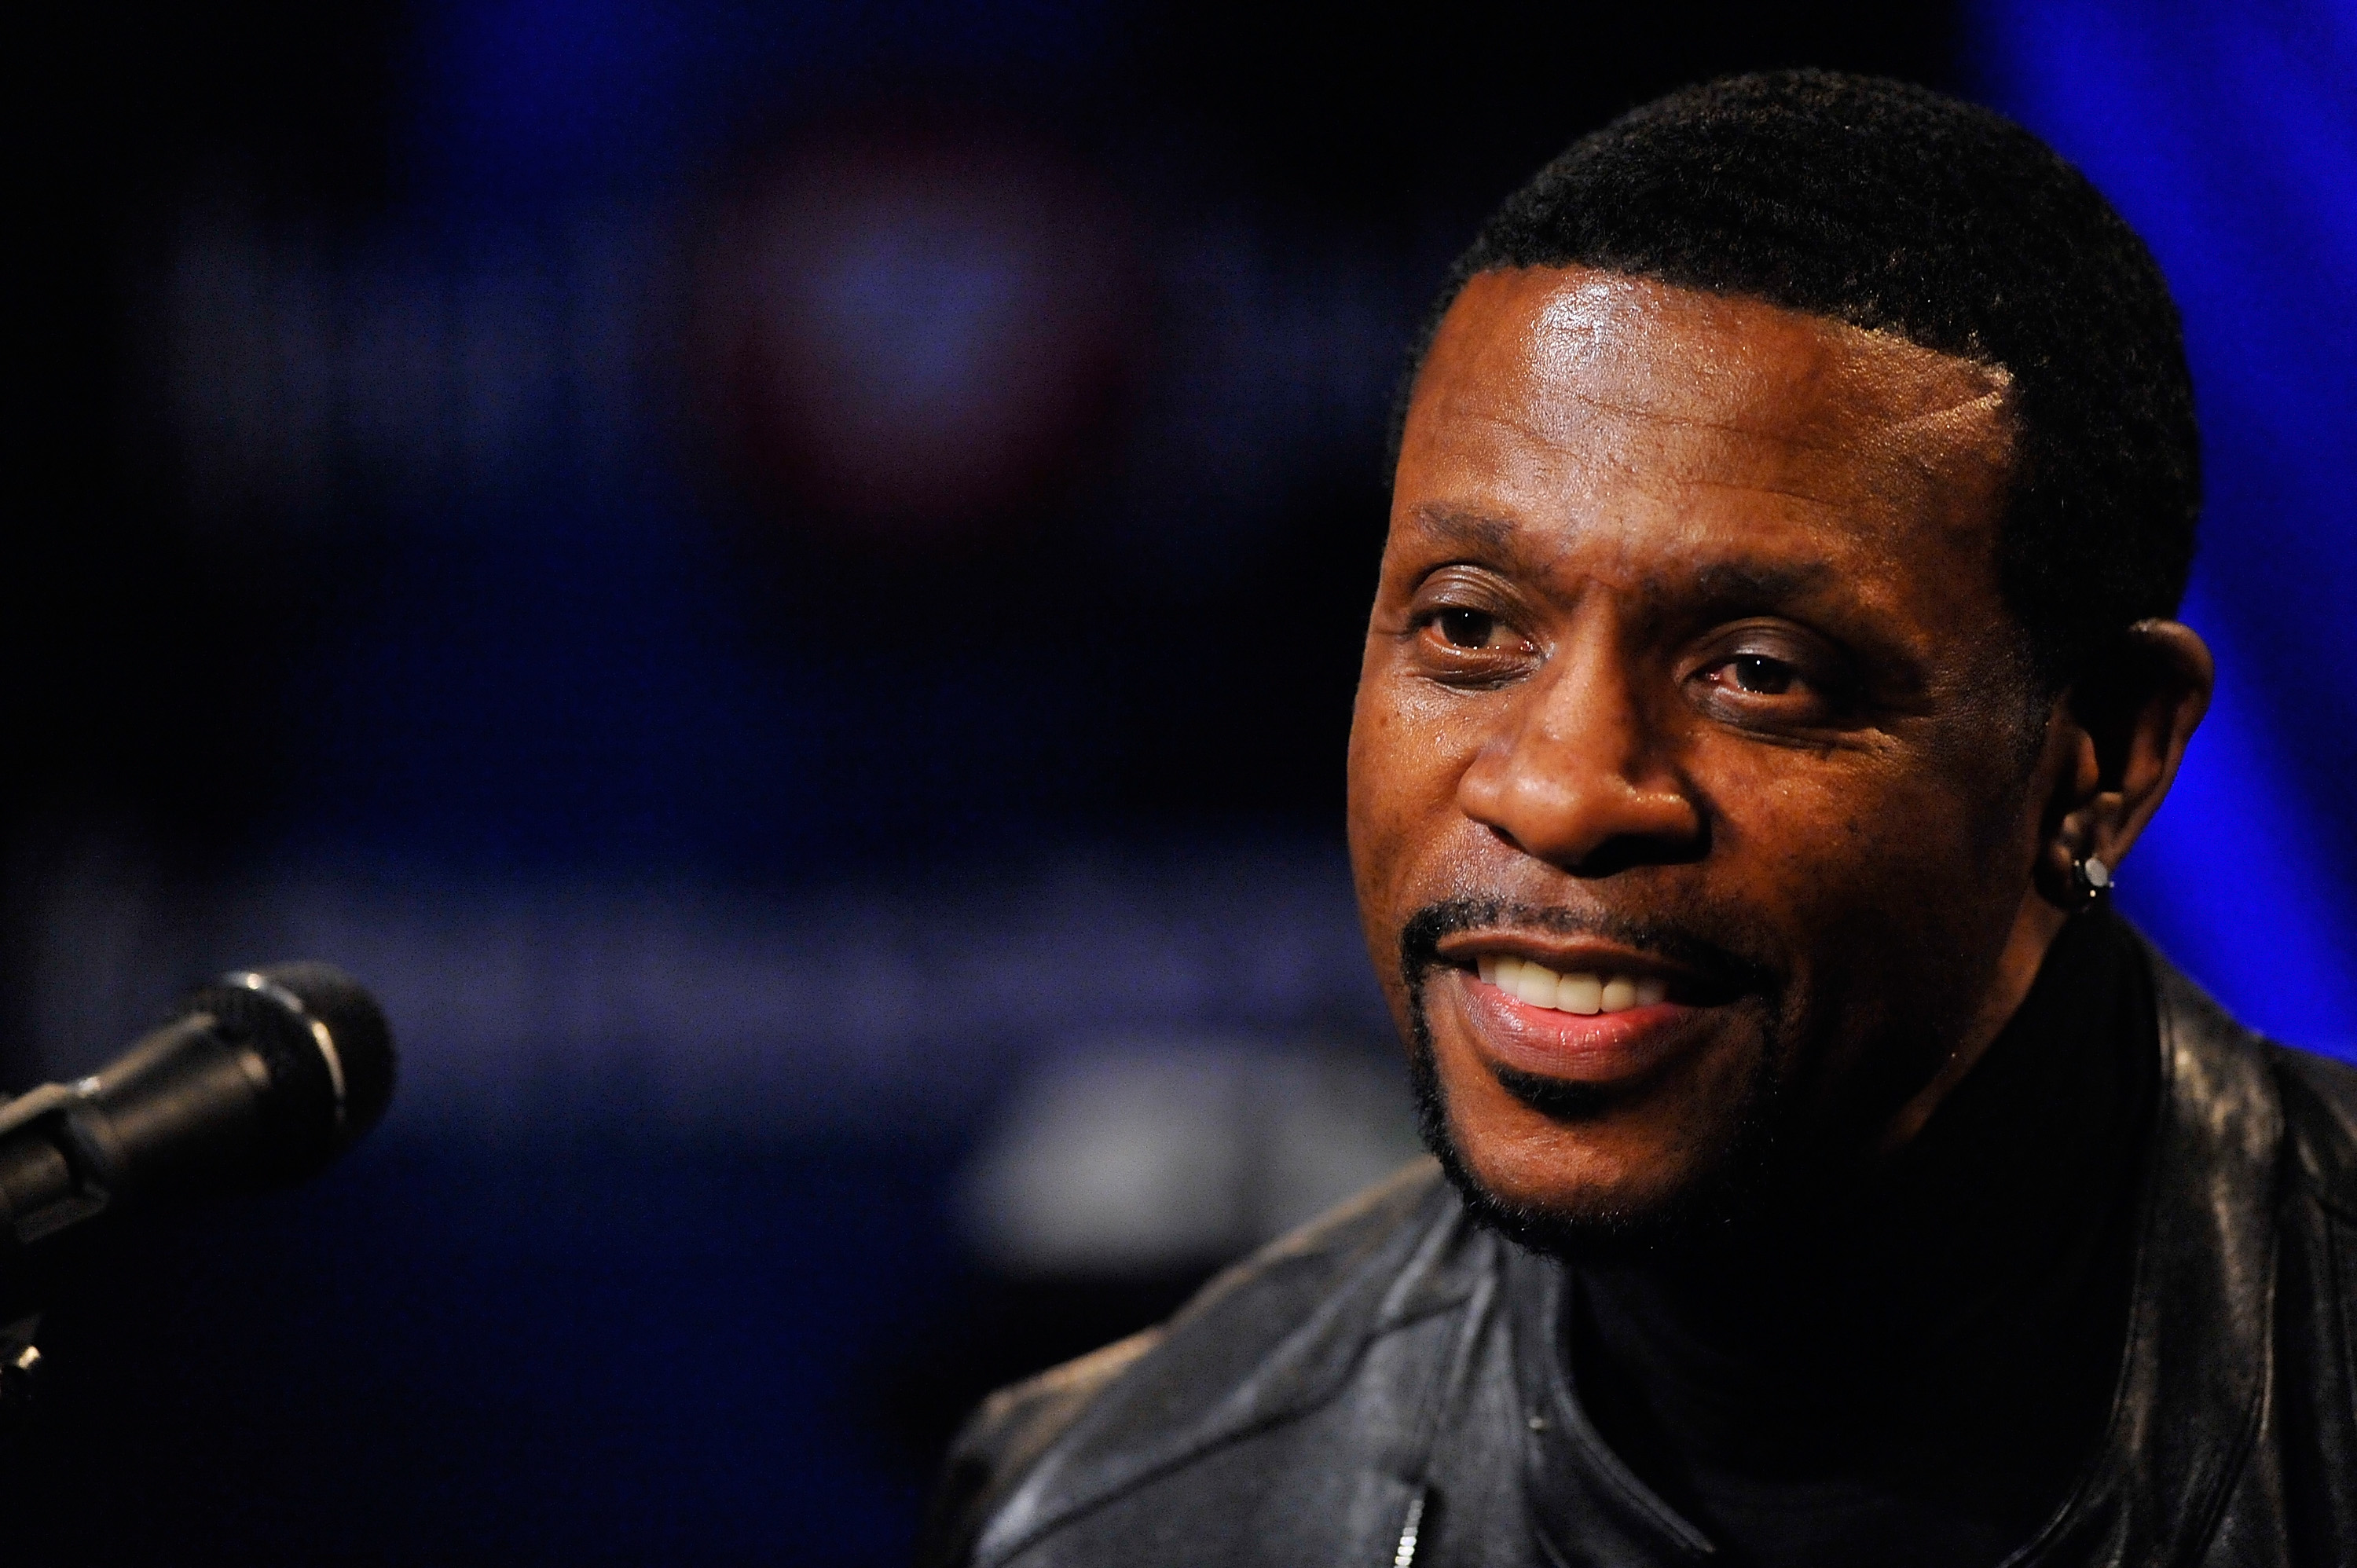 Win Your Tickets To See Keith Sweat, Avant & Mint Condition! 105.3 RnB